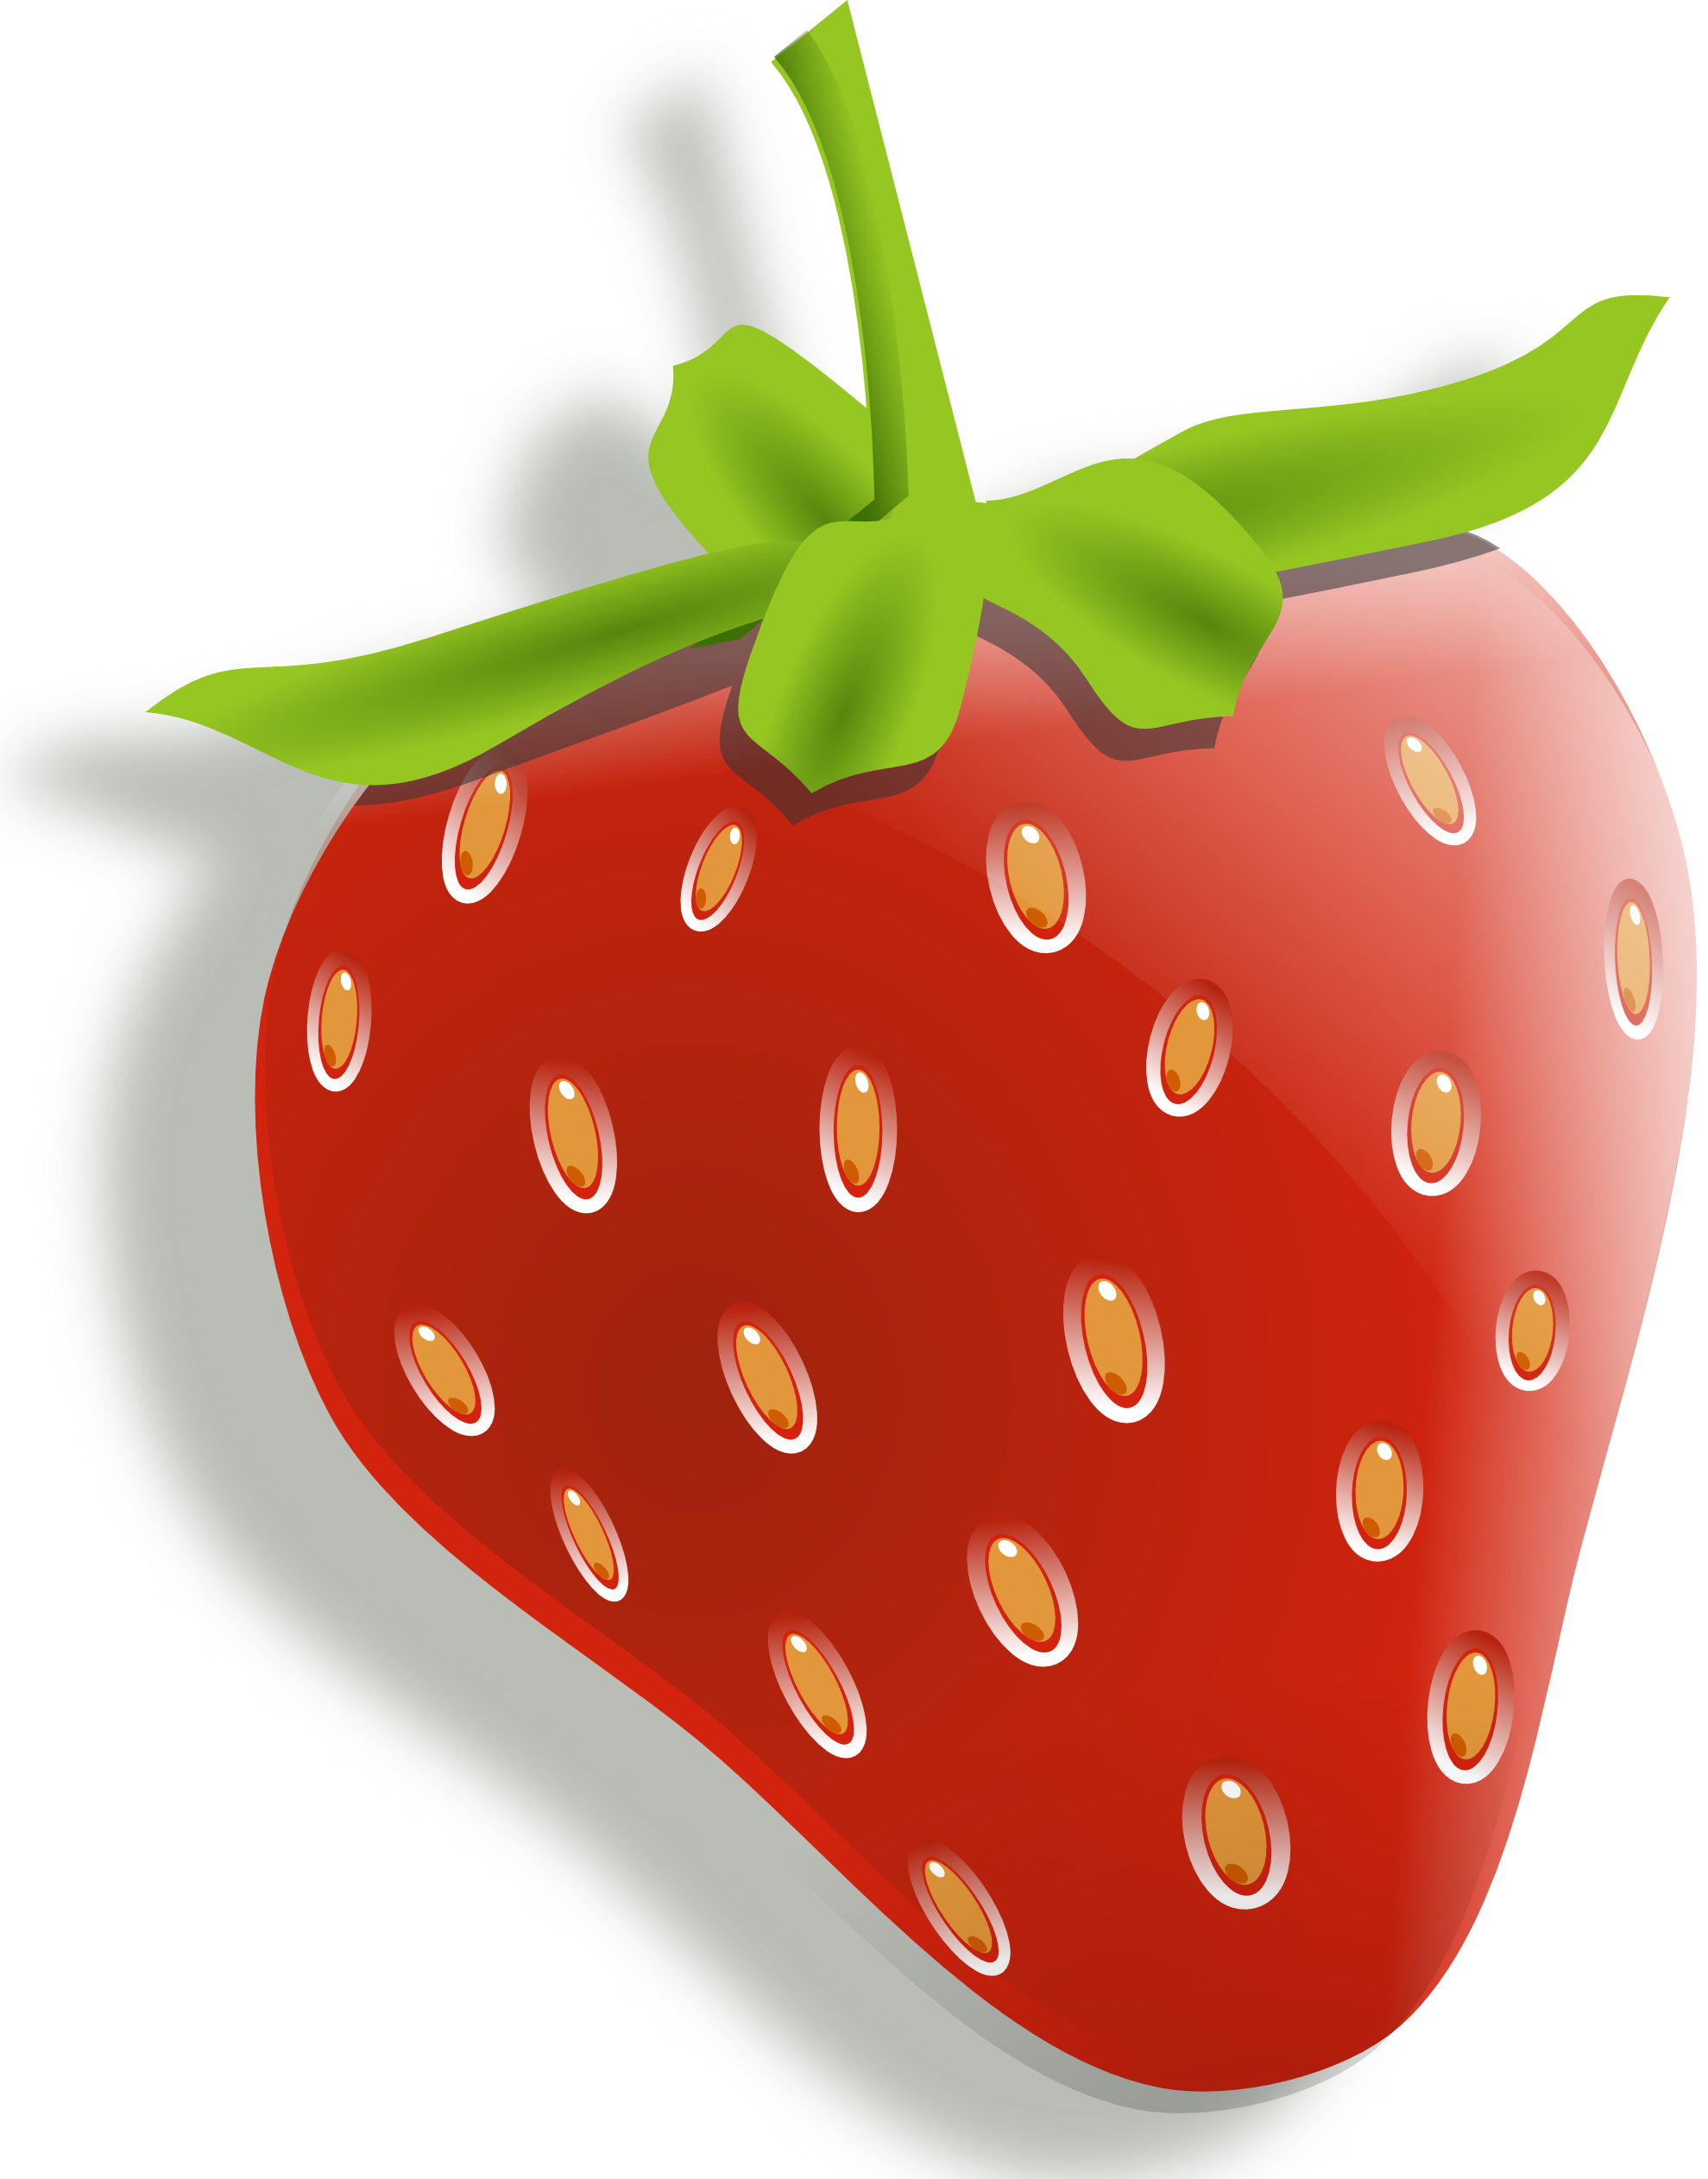 Strawberry PNG Image